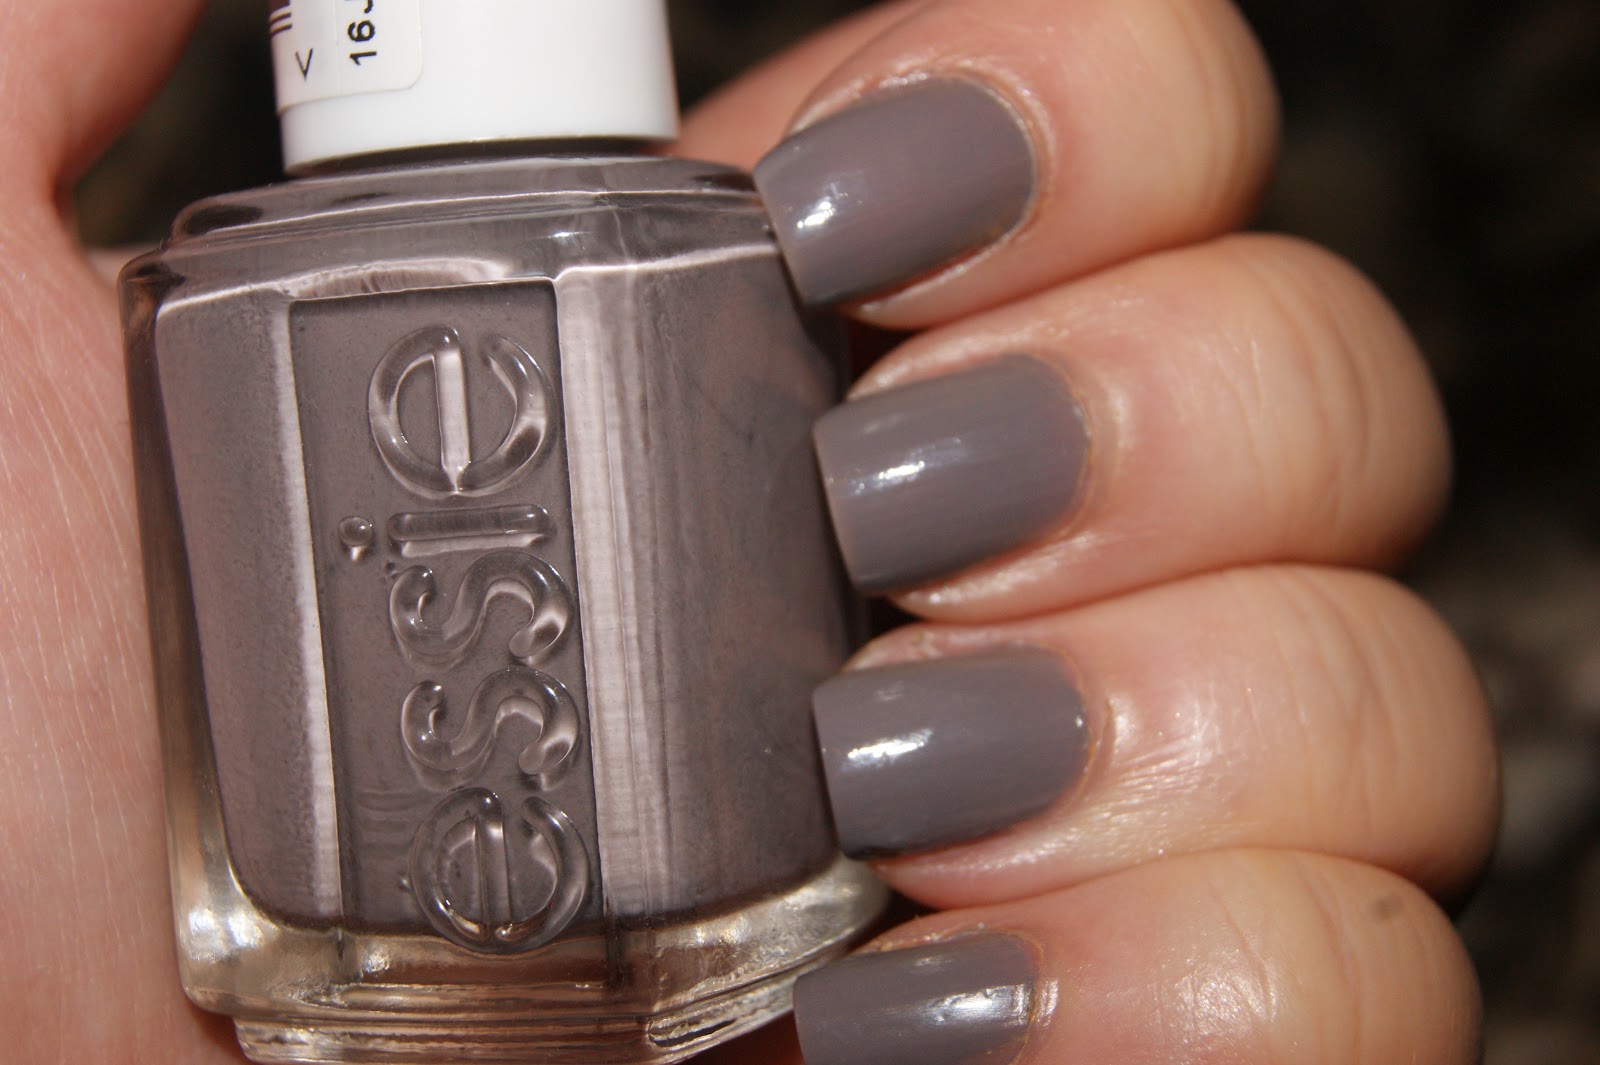 Essie Nail Polish in "Chinchilly" - wide 3